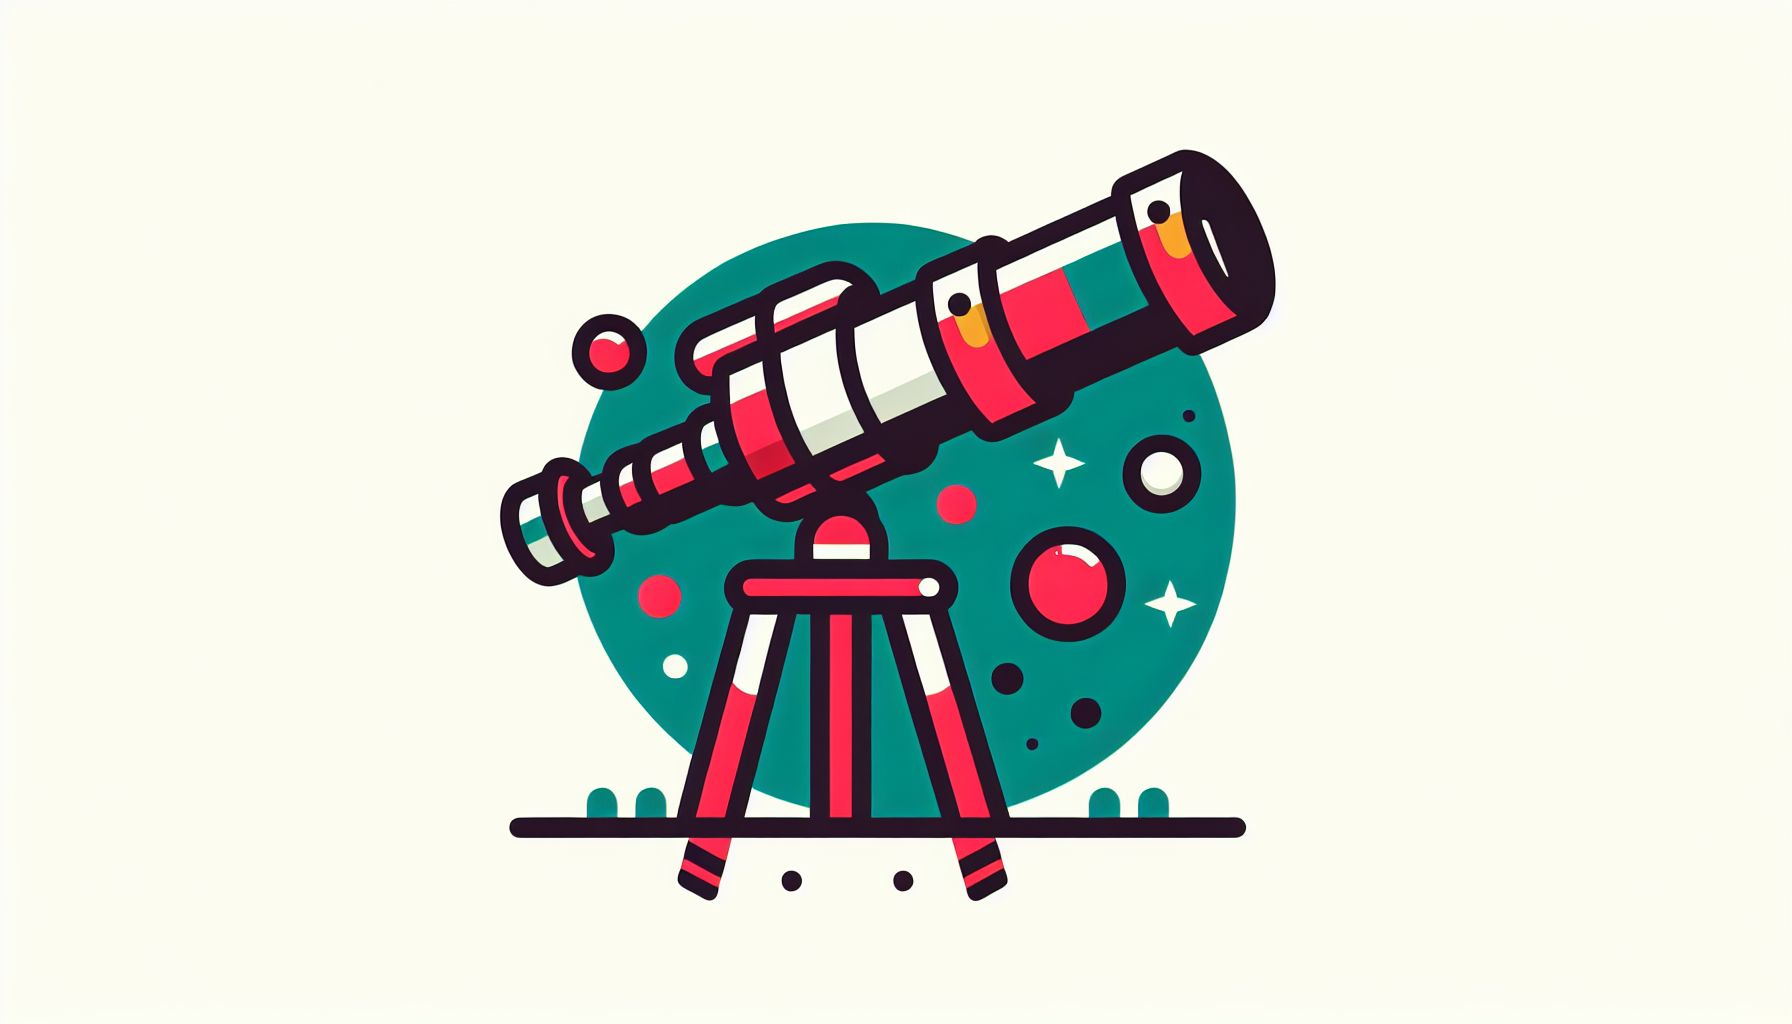 Telescope in flat illustration style and white background, red #f47574, green #88c7a8, yellow #fcc44b, and blue #645bc8 colors.